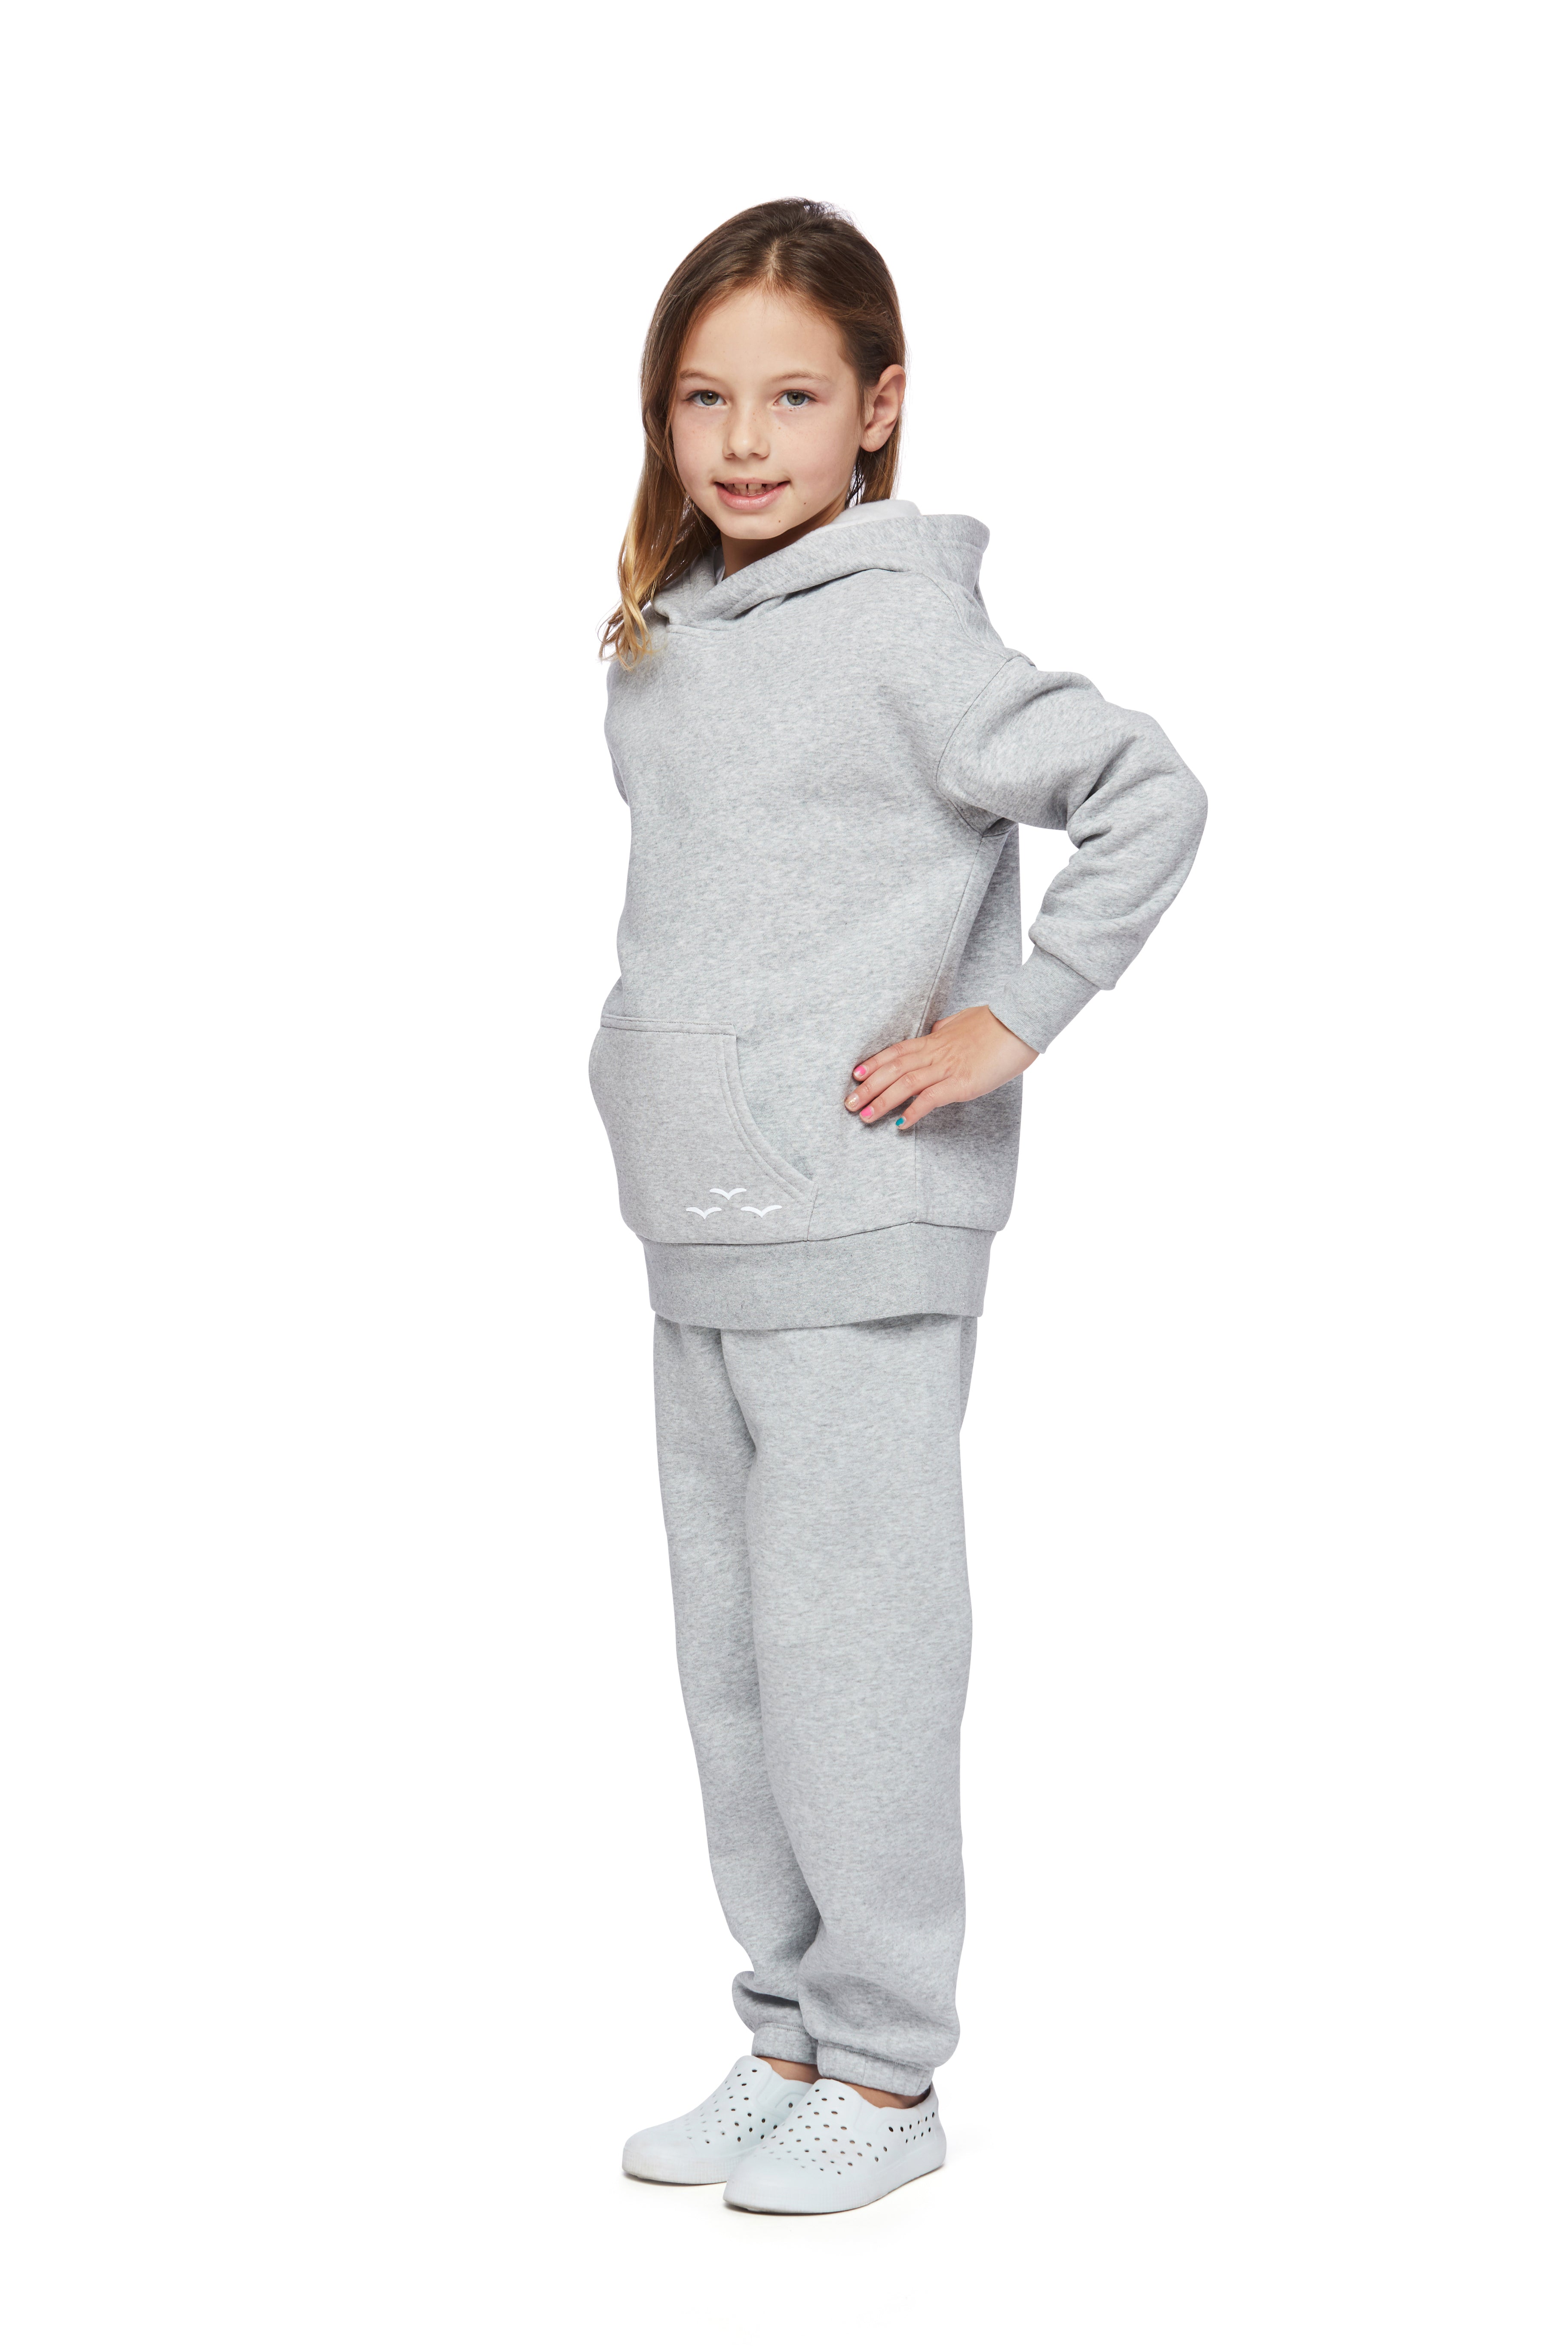 Kids Niki and Cooper fleece set in classic grey from Lazypants - always a great buy at a reasonable price.